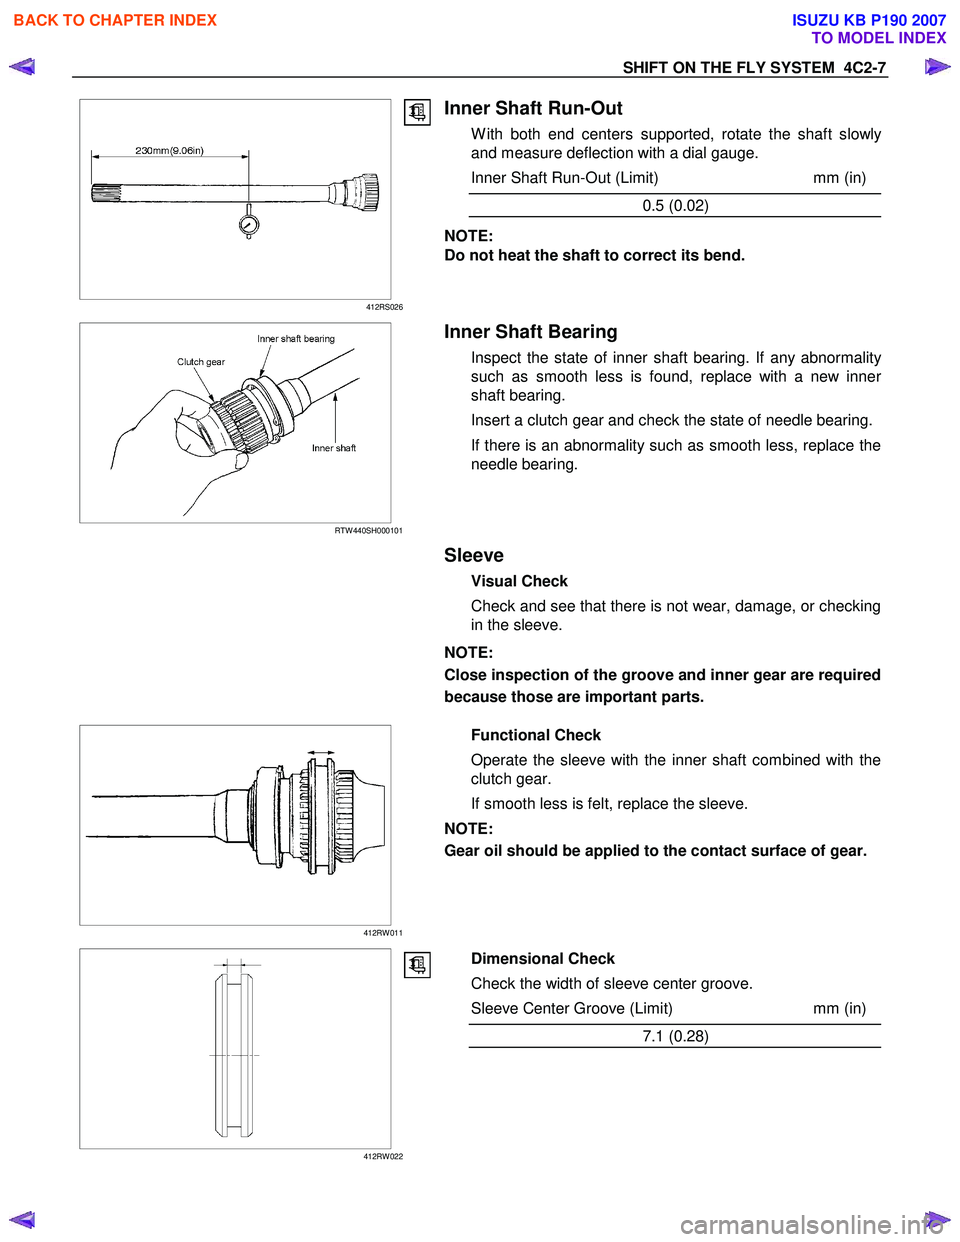 ISUZU KB P190 2007  Workshop Repair Manual SHIFT ON THE FLY SYSTEM  4C2-7 
   
 
 
 
 
 
 
 
 
 
 
 
 
 
 
412RS026
Inner Shaft Run-Out 
W ith both end centers supported, rotate the shaft slowly
and measure deflection with a dial gauge.  
Inne